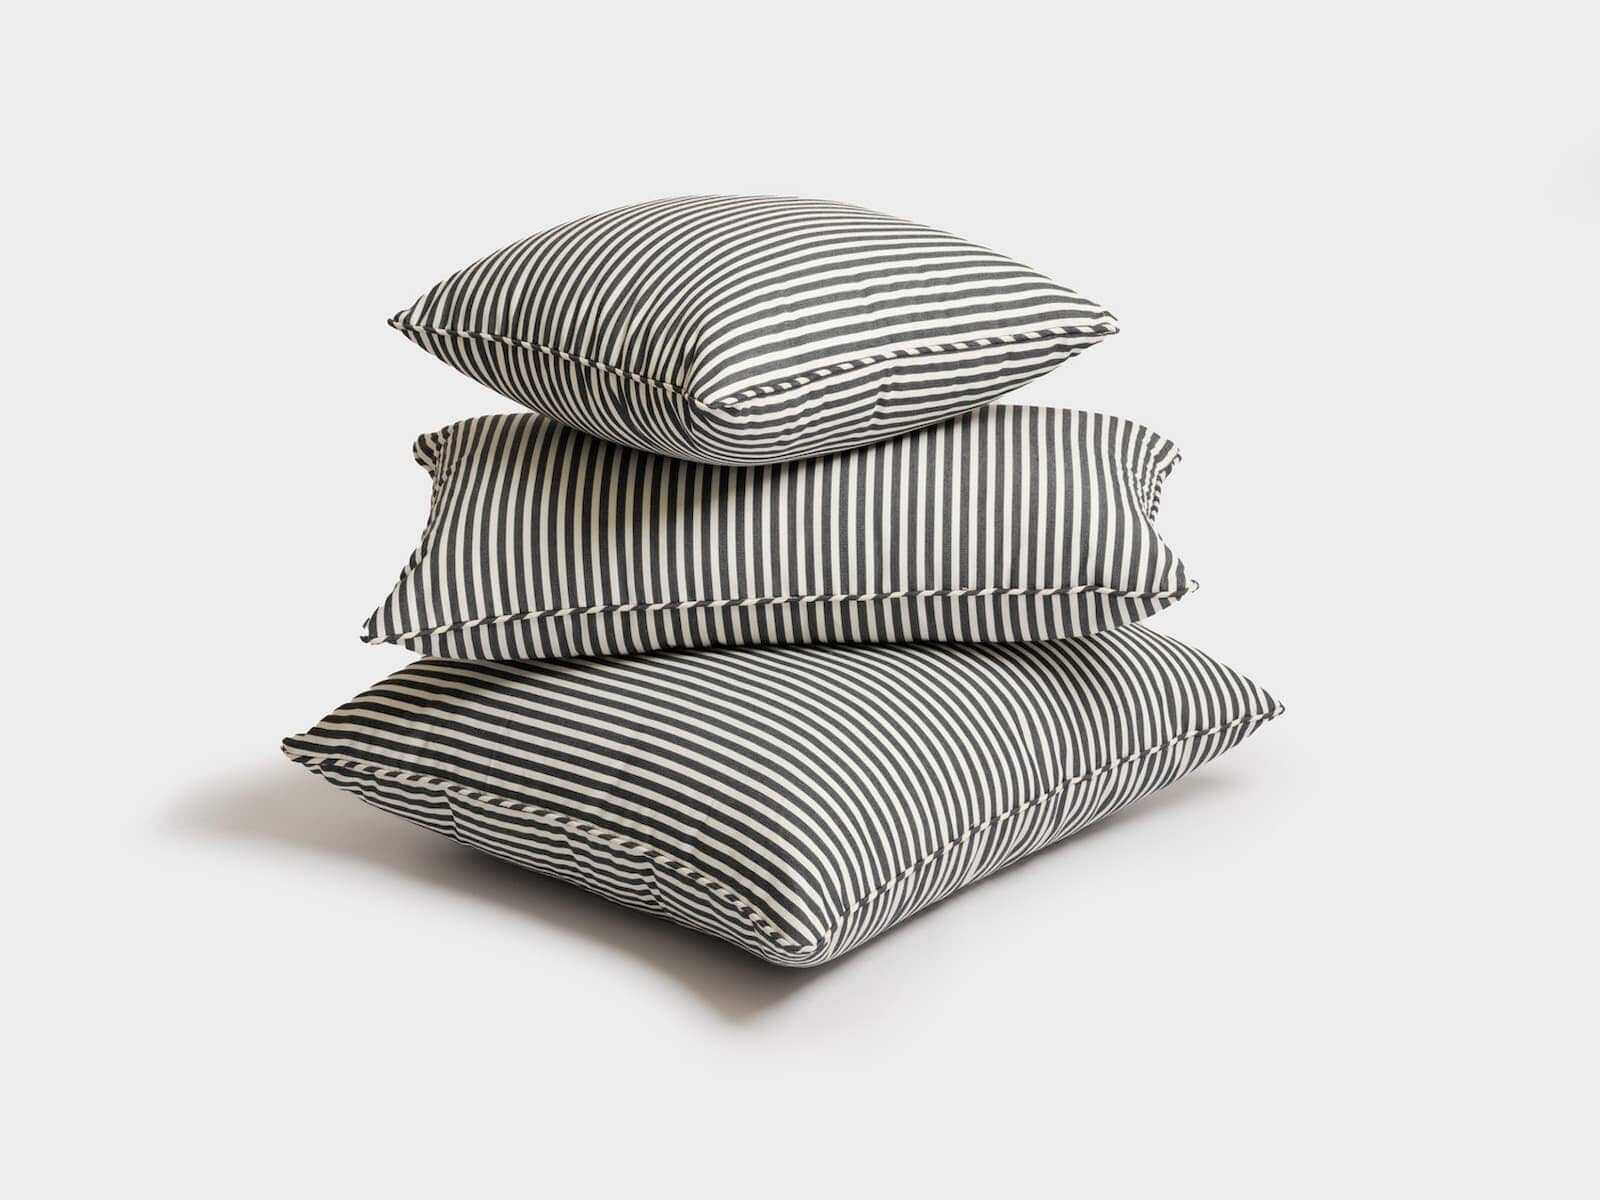 studio images of 3 throw pillows stacked up